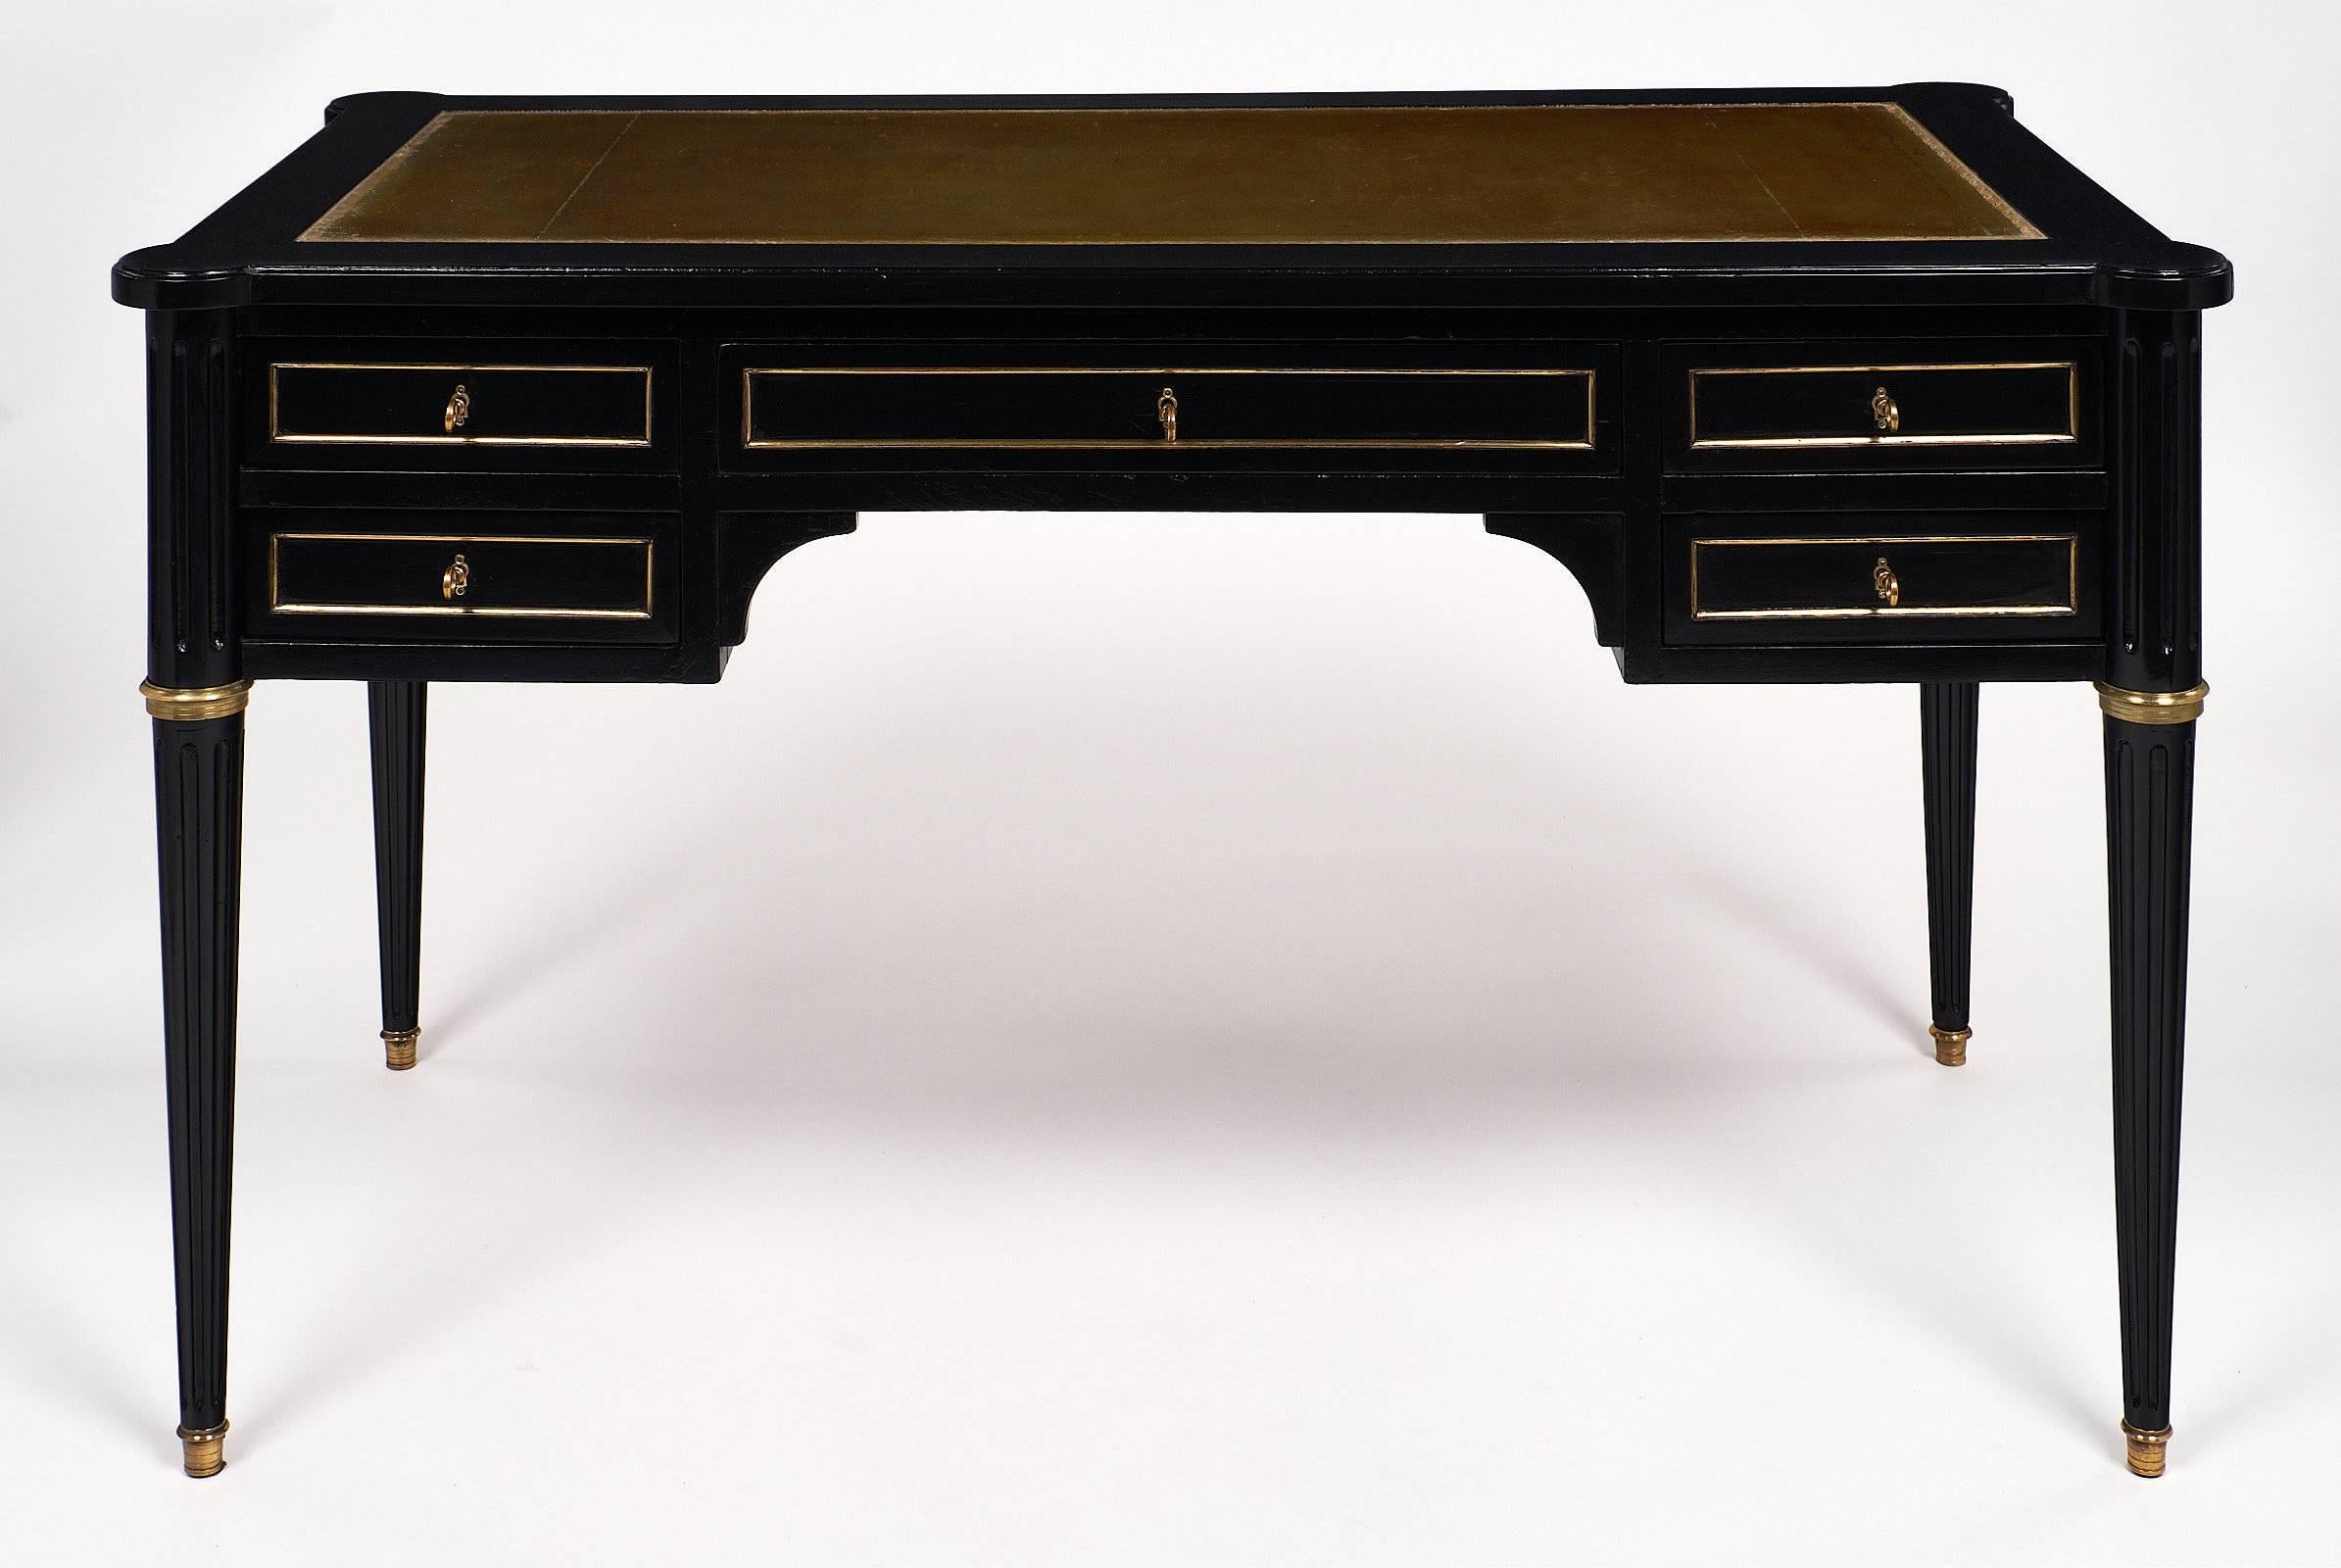 Handsome Louis XVI style desk with a superb leather writing surface. This mahogany piece has been ebonized and finished with a French polish finish for luster. The leather surface has an embossed, gold leafed frieze border. The desk has a pullout